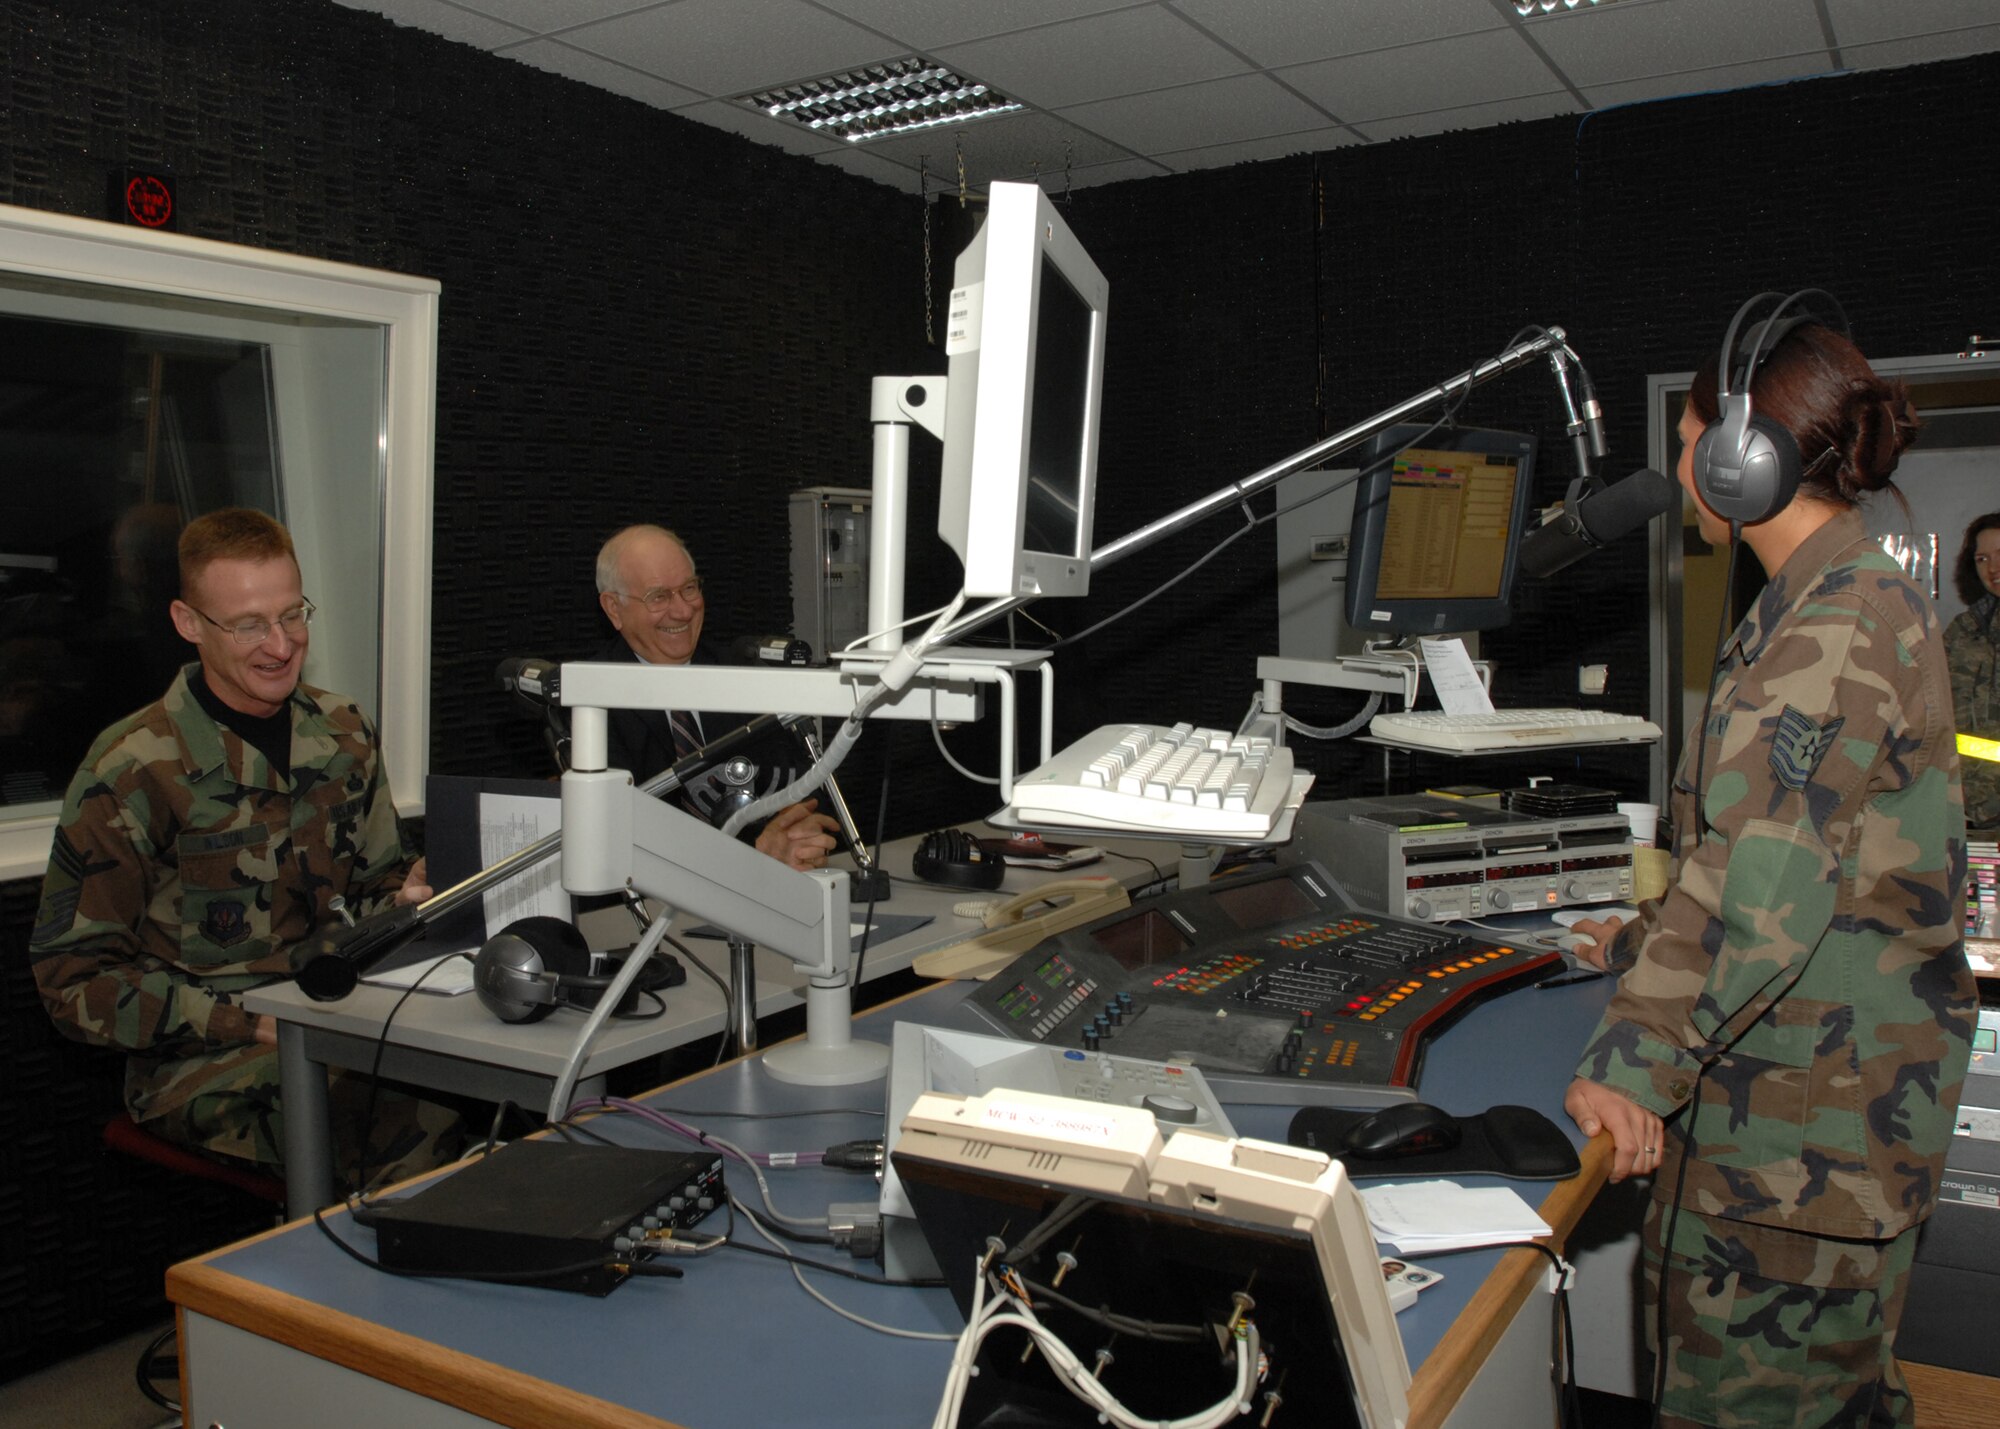 SPANGDAHLEM IAR BASE, Germany – Tech. Sgt. Szu-Moy Ruiz, Detachment 9, Air Force News Agency broadcaster, conducts a radio interview with retired Chief Master Sgt. of the Air Force Sam Parish as Chief Master Sgt. Scott Wilson, 52nd Mission Support Group superintendent, looks on Jan. 18, 2008. The studio was the first stop of the morning in a long day of public appearances for Chief Parish. (U.S. Air Force photo/Airman 1st Class Jenifer Calhoun)